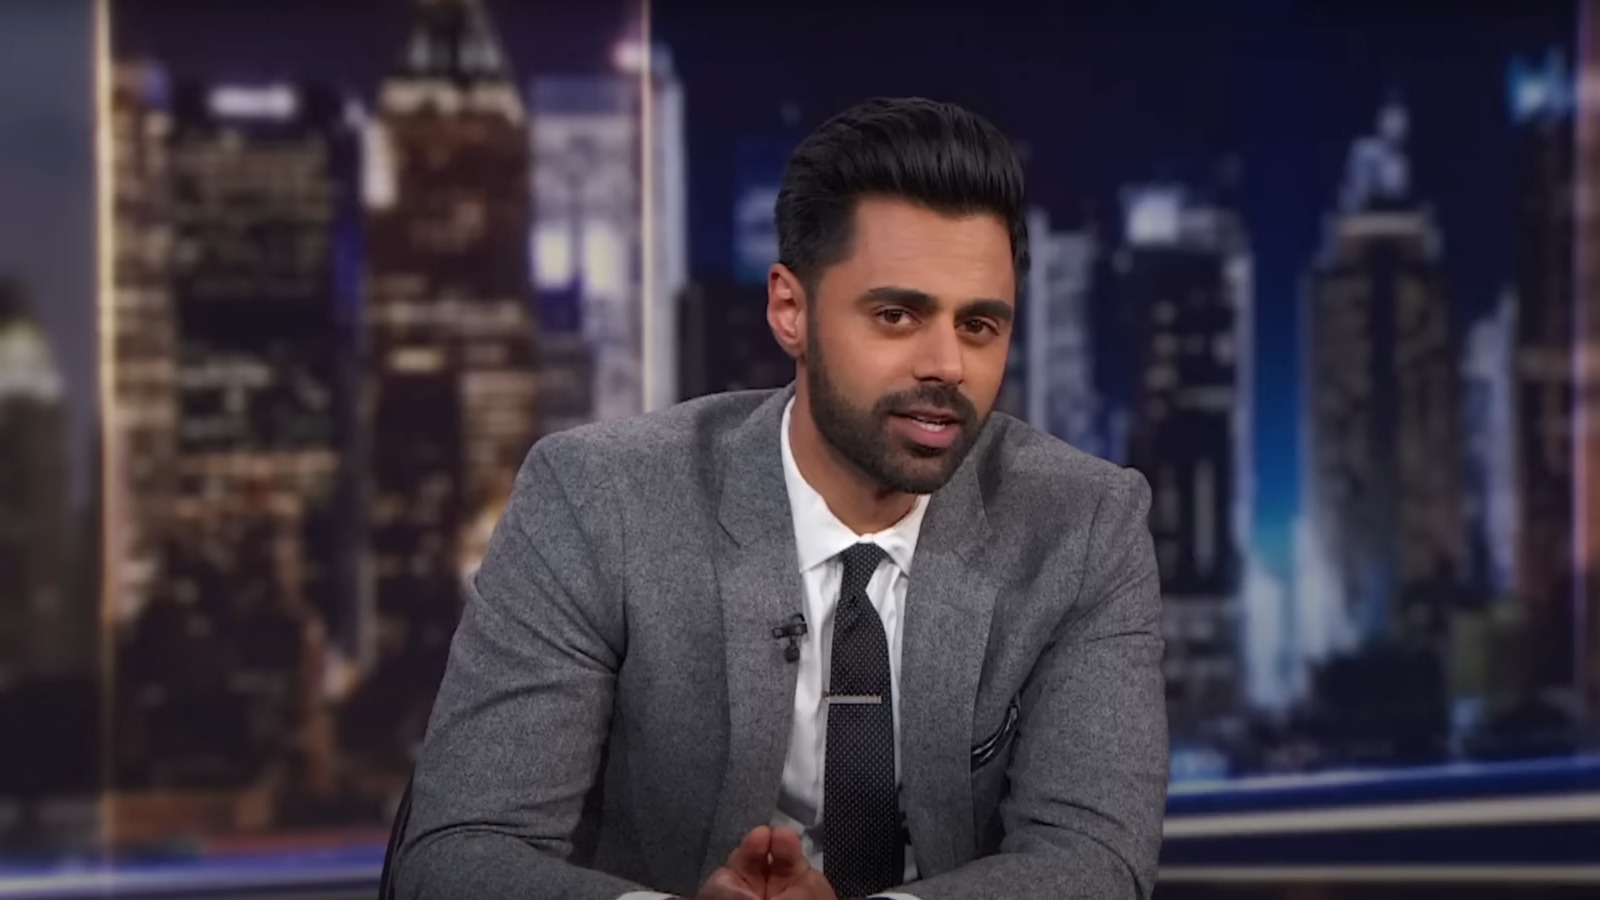 Hasan Minhaj Is The Leading Candidate To Take Over The Daily Show